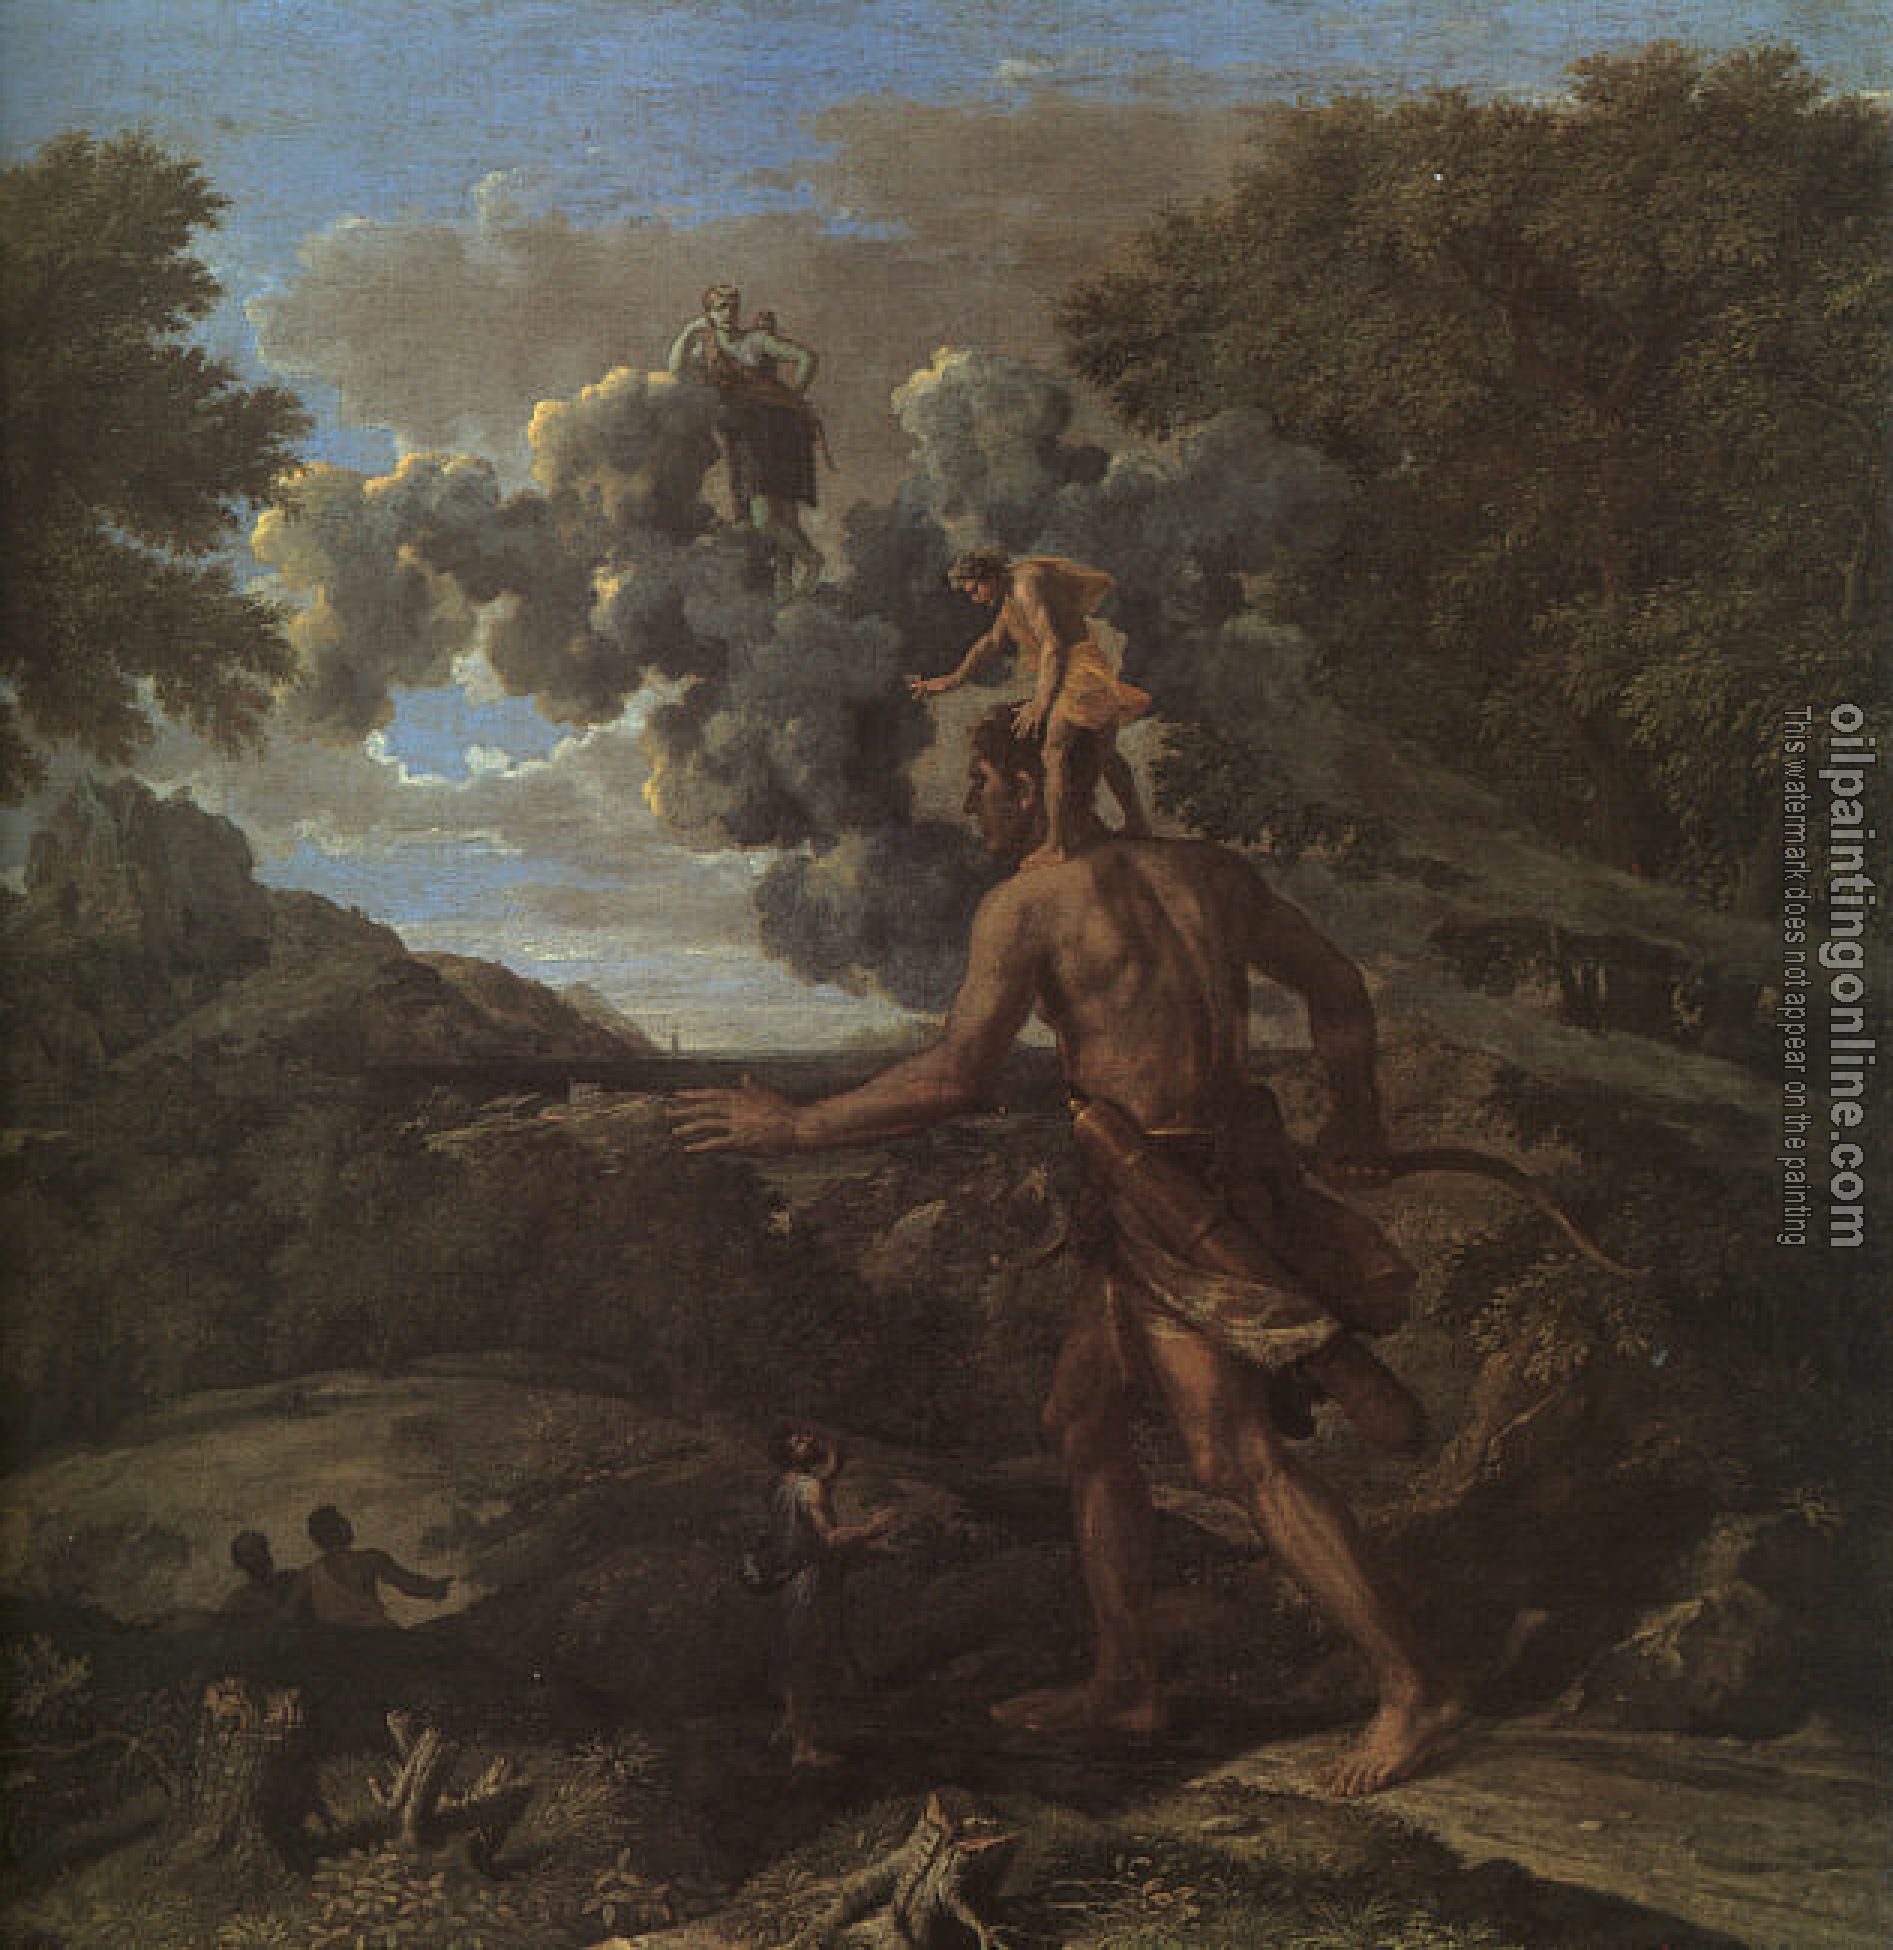 Poussin, Nicolas - Blind Orion Searching for the Rising Sun